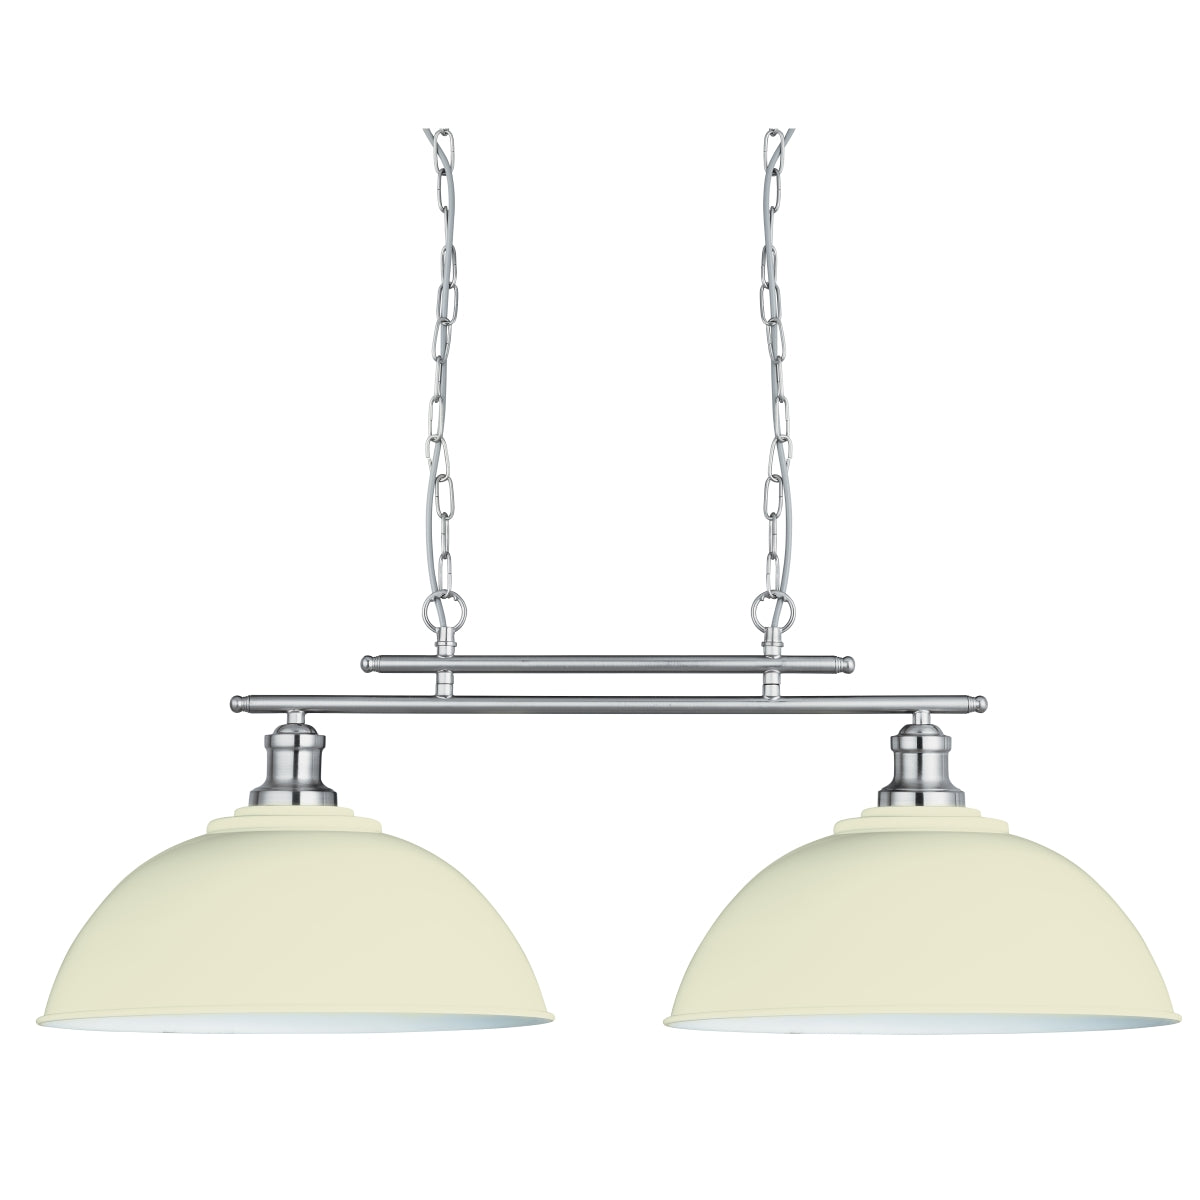 Introducing our Olive 2 light bar ceiling pendant with its exposed industrial inspired design. With its modern and contemporary combination of the cream metal shades and silver detailing, this pendant is sure to give the perfect lighting effect